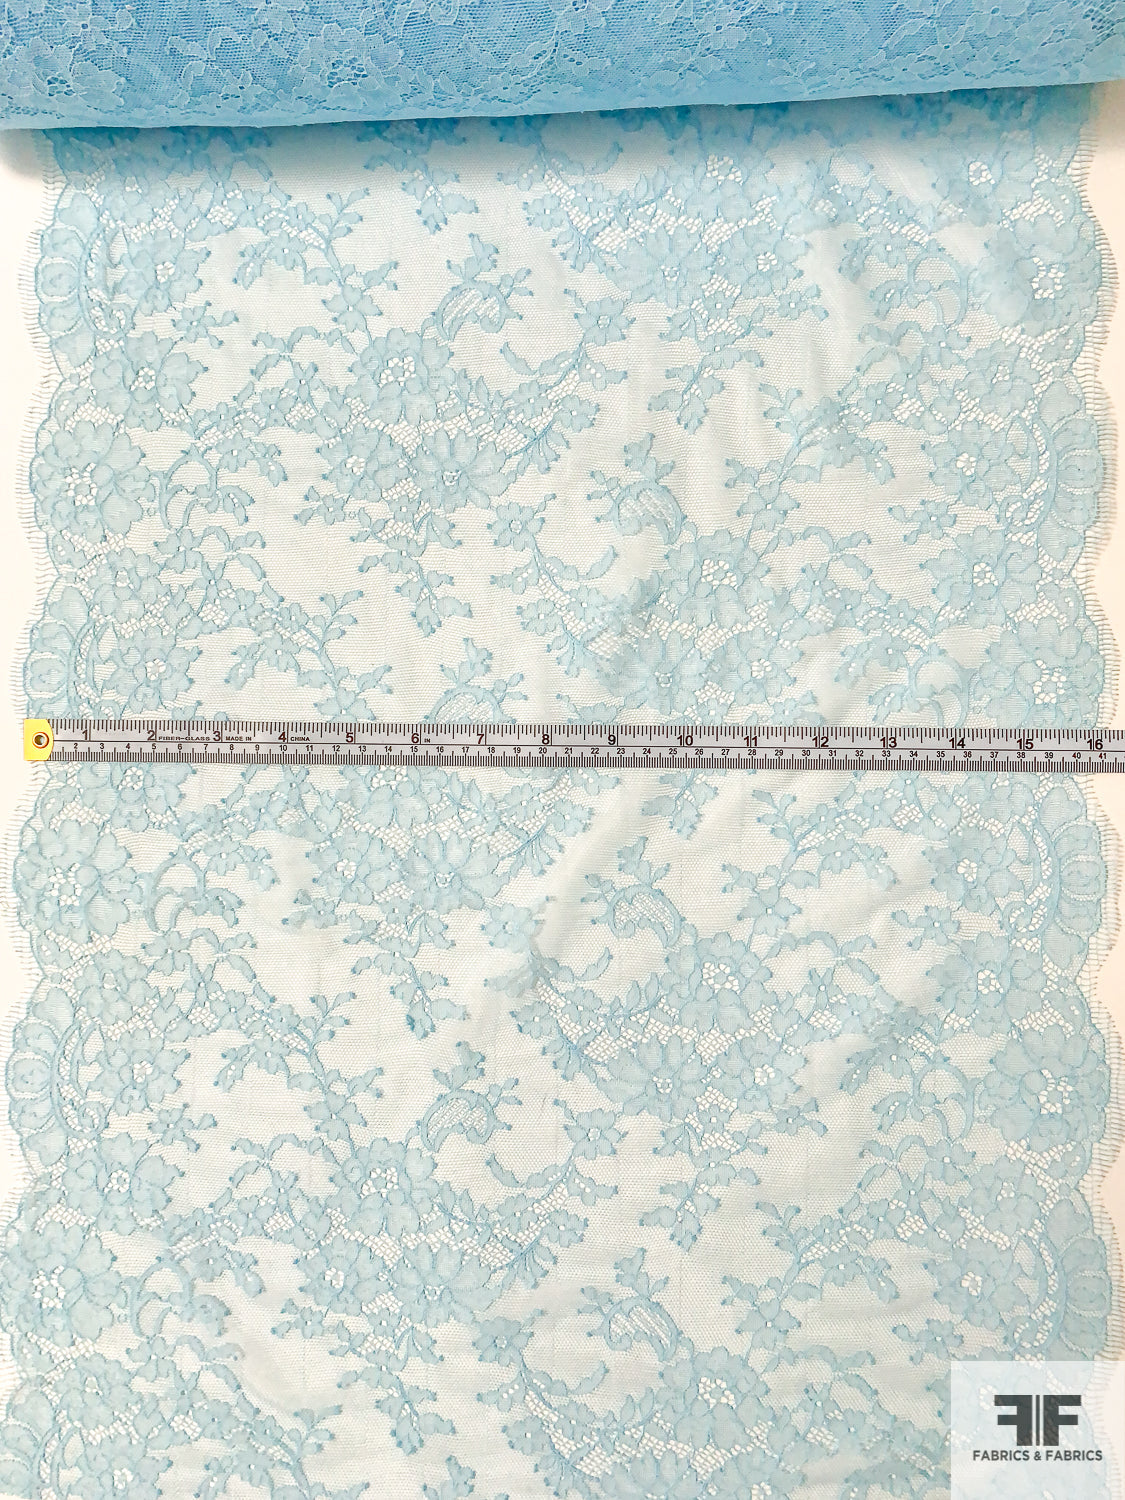 French Floral Chantilly Lace Trim Strip - Light Blue - Lace by the Strip